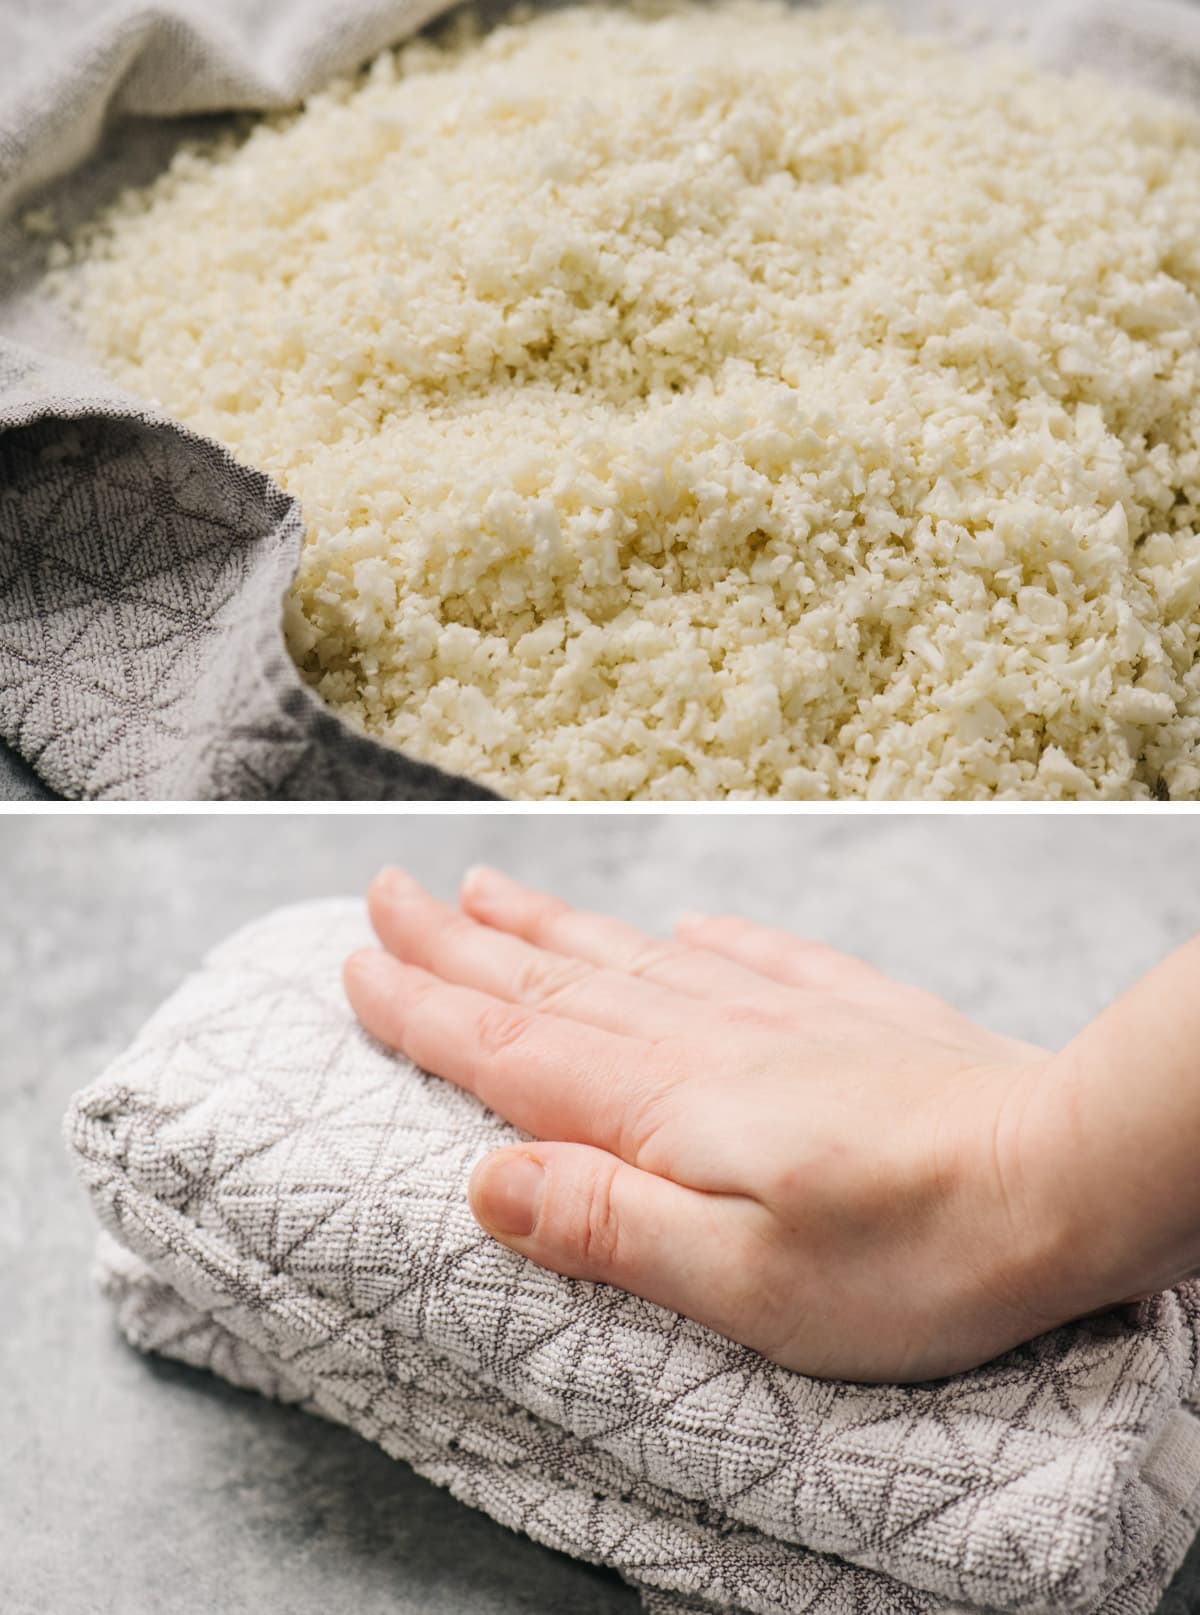 Top - cauliflower rice in a tea towel; bottom - pressing on cauliflower rice wrapped in a tea towel to wring out excess moisture.